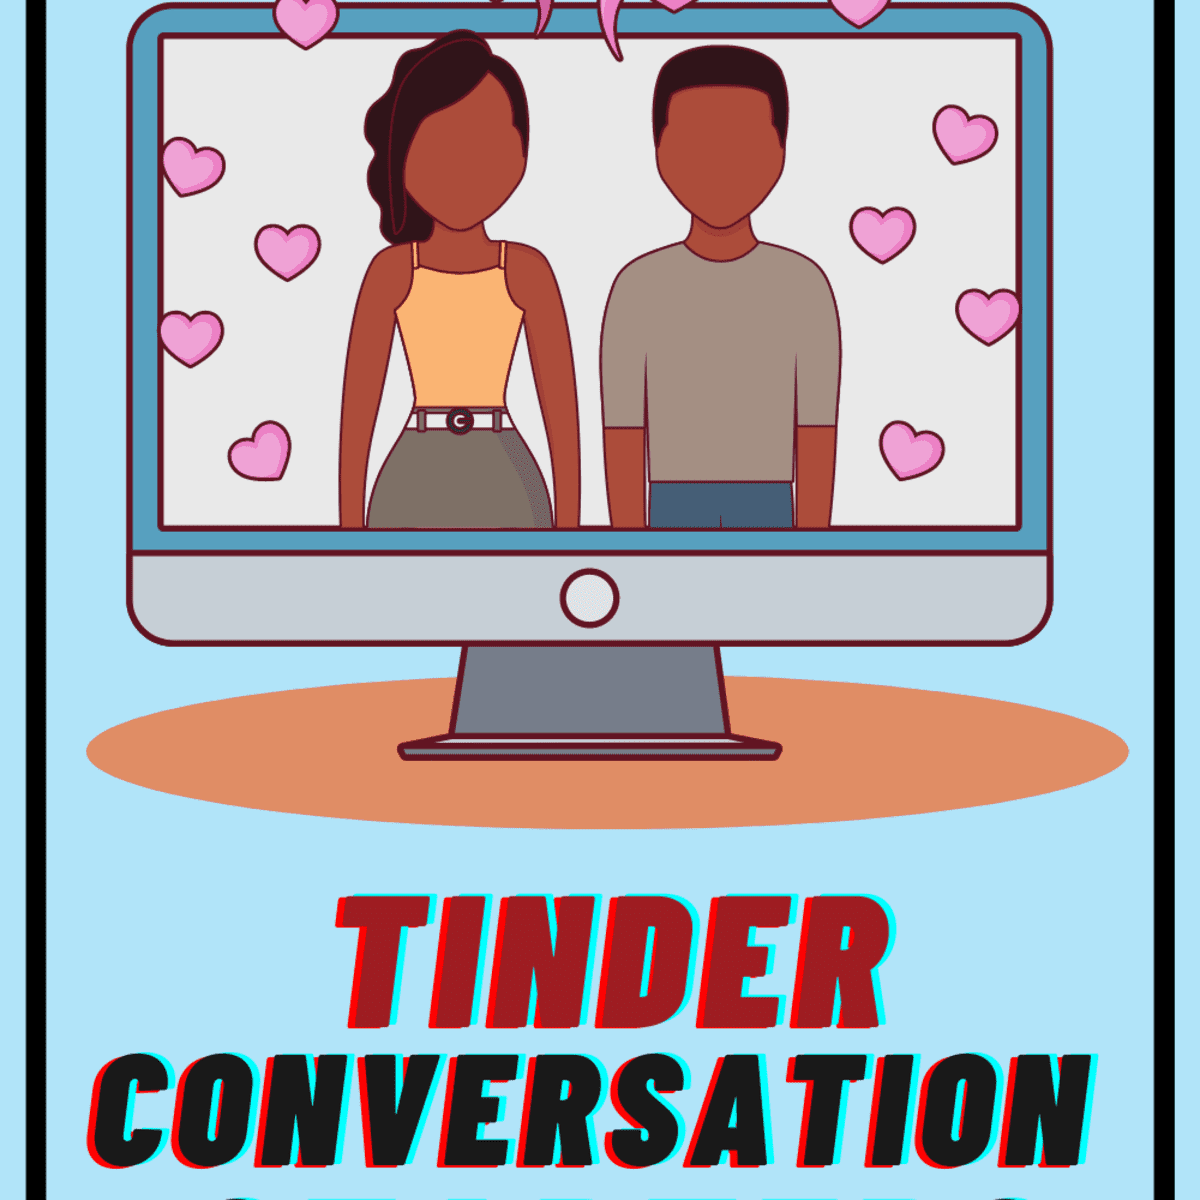 how to start a conversation on a dating app